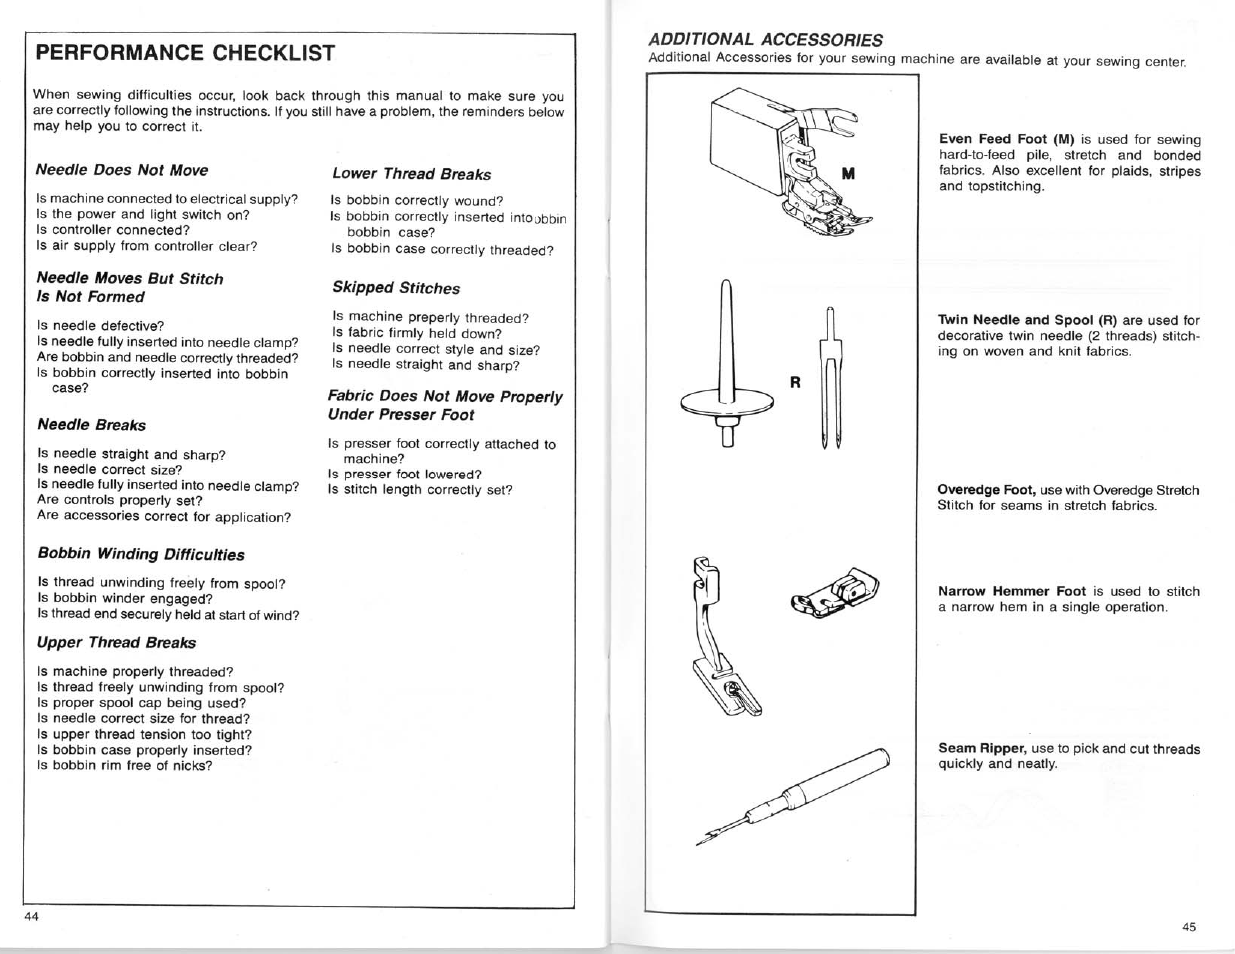 Needle does not move, Needle moves but stitch is not formed, Needle breaks | Bobbin winding difficulties, Lower thread breaks, Skipped stitches, Fabric does not move properly under presser foot, Additional accessories, Performance checklist | SINGER 9124 User Manual | Page 24 / 25